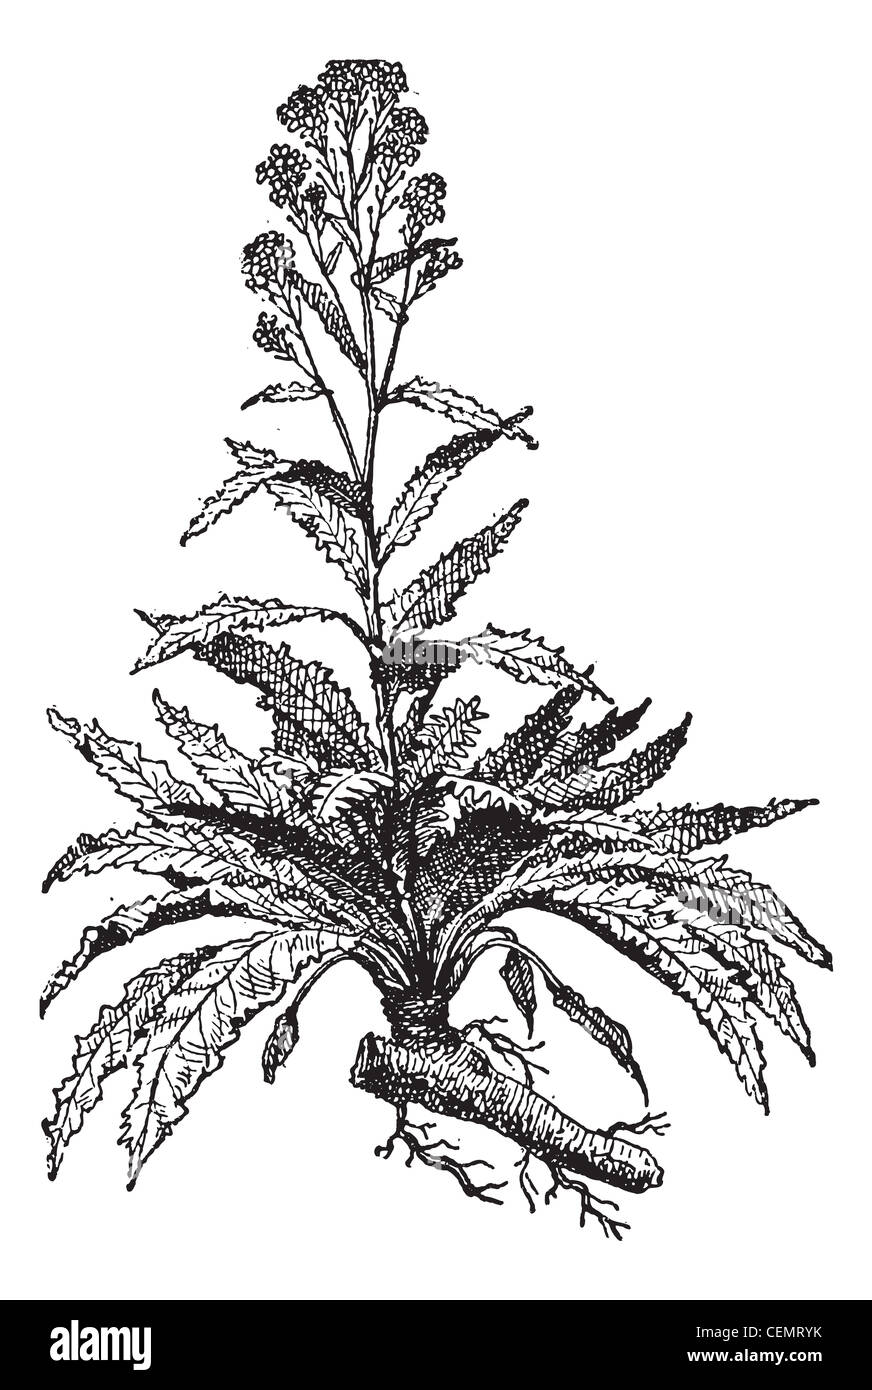 Old engraved illustration of Horseradish or Armoracia rusticana or Cochlearia armoracia isolated on a white background. Dictionary of words and things - Larive and Fleury ? 1895 Stock Photo